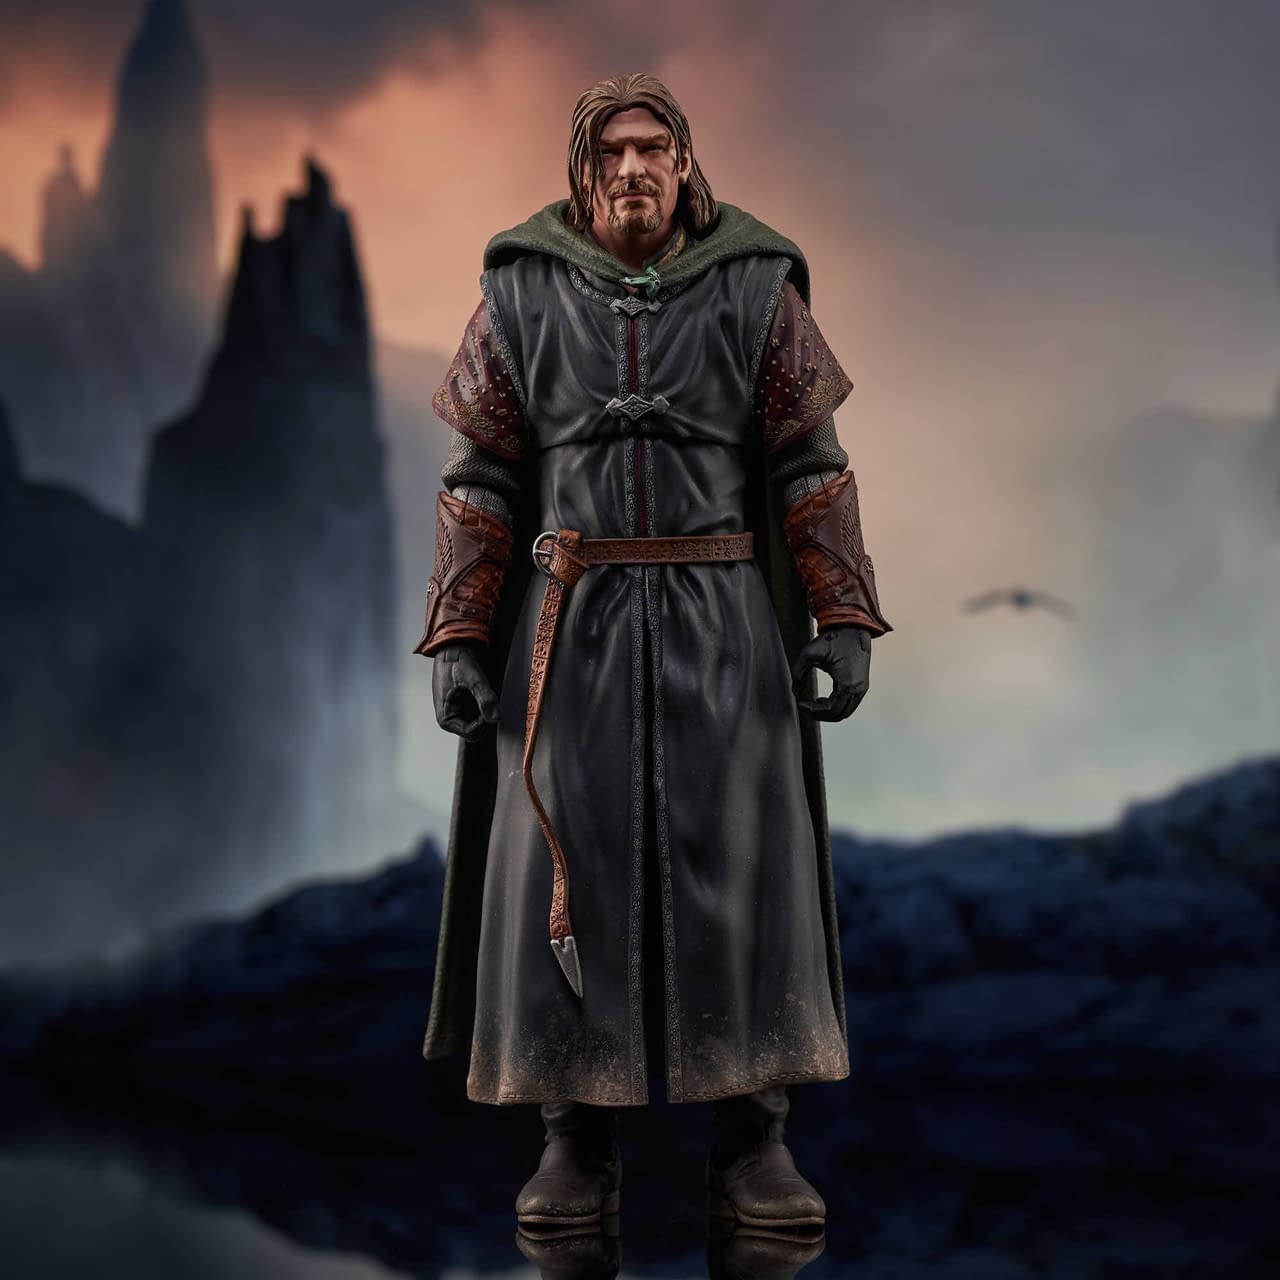 Lord of the Rings Series 5 Figures Arrive from Diamond Select Toys 